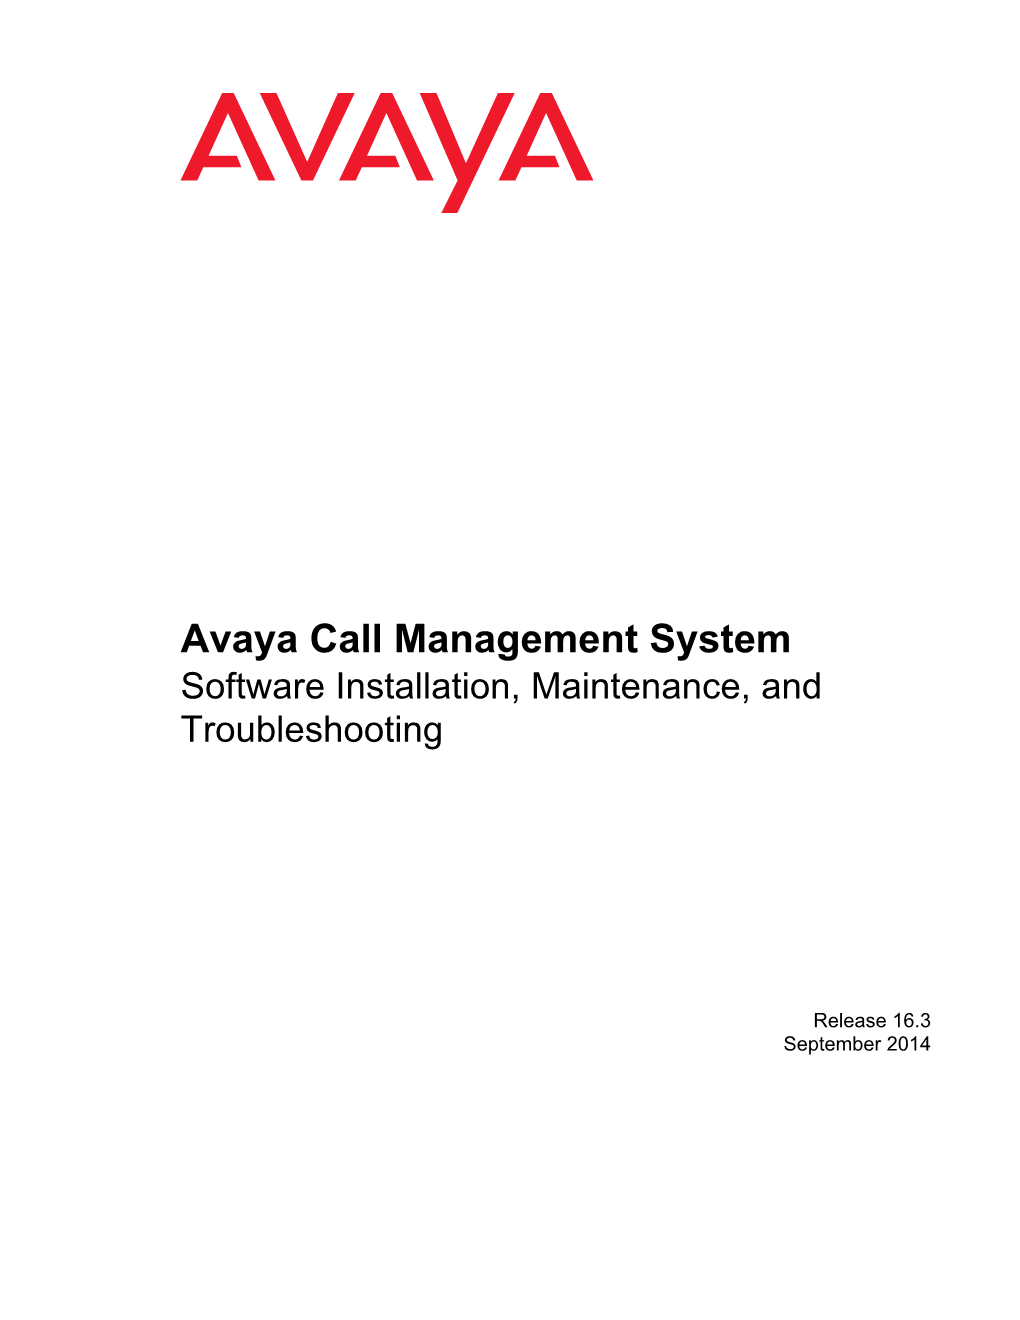 Avaya Call Management System Software Installation, Maintenance, and Troubleshooting